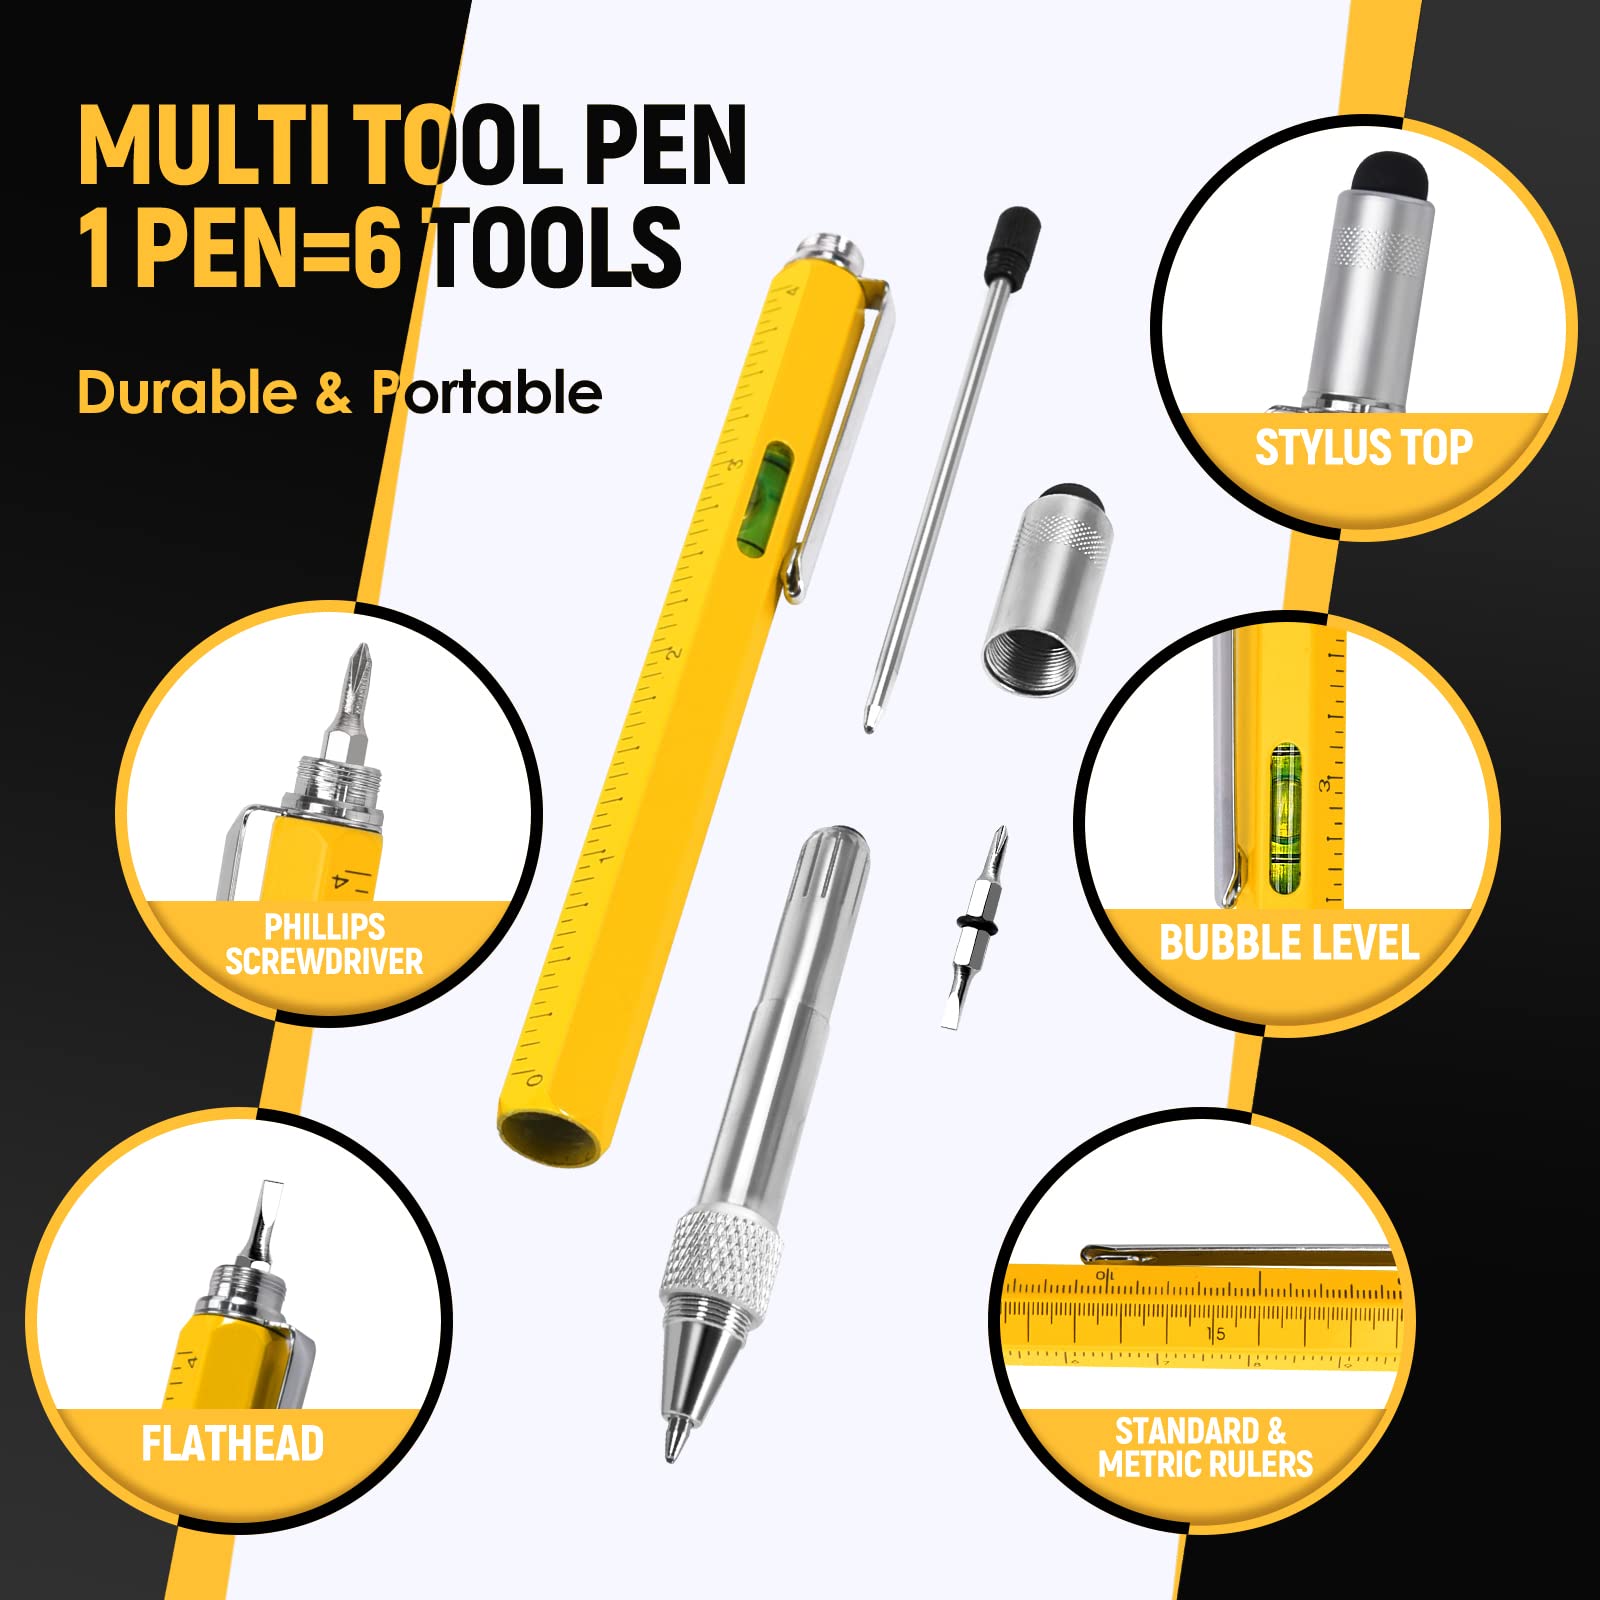 BIIB Gifts for Men, Multitool Pen Dad Gifts for Men, Birthday Gifts for Men, Mens Gifts for Boyfriend, Husband, Grandpa, Him, Cool Stuff Tools Gadgets for Men, Gifts for Dad Who Wants Nothing